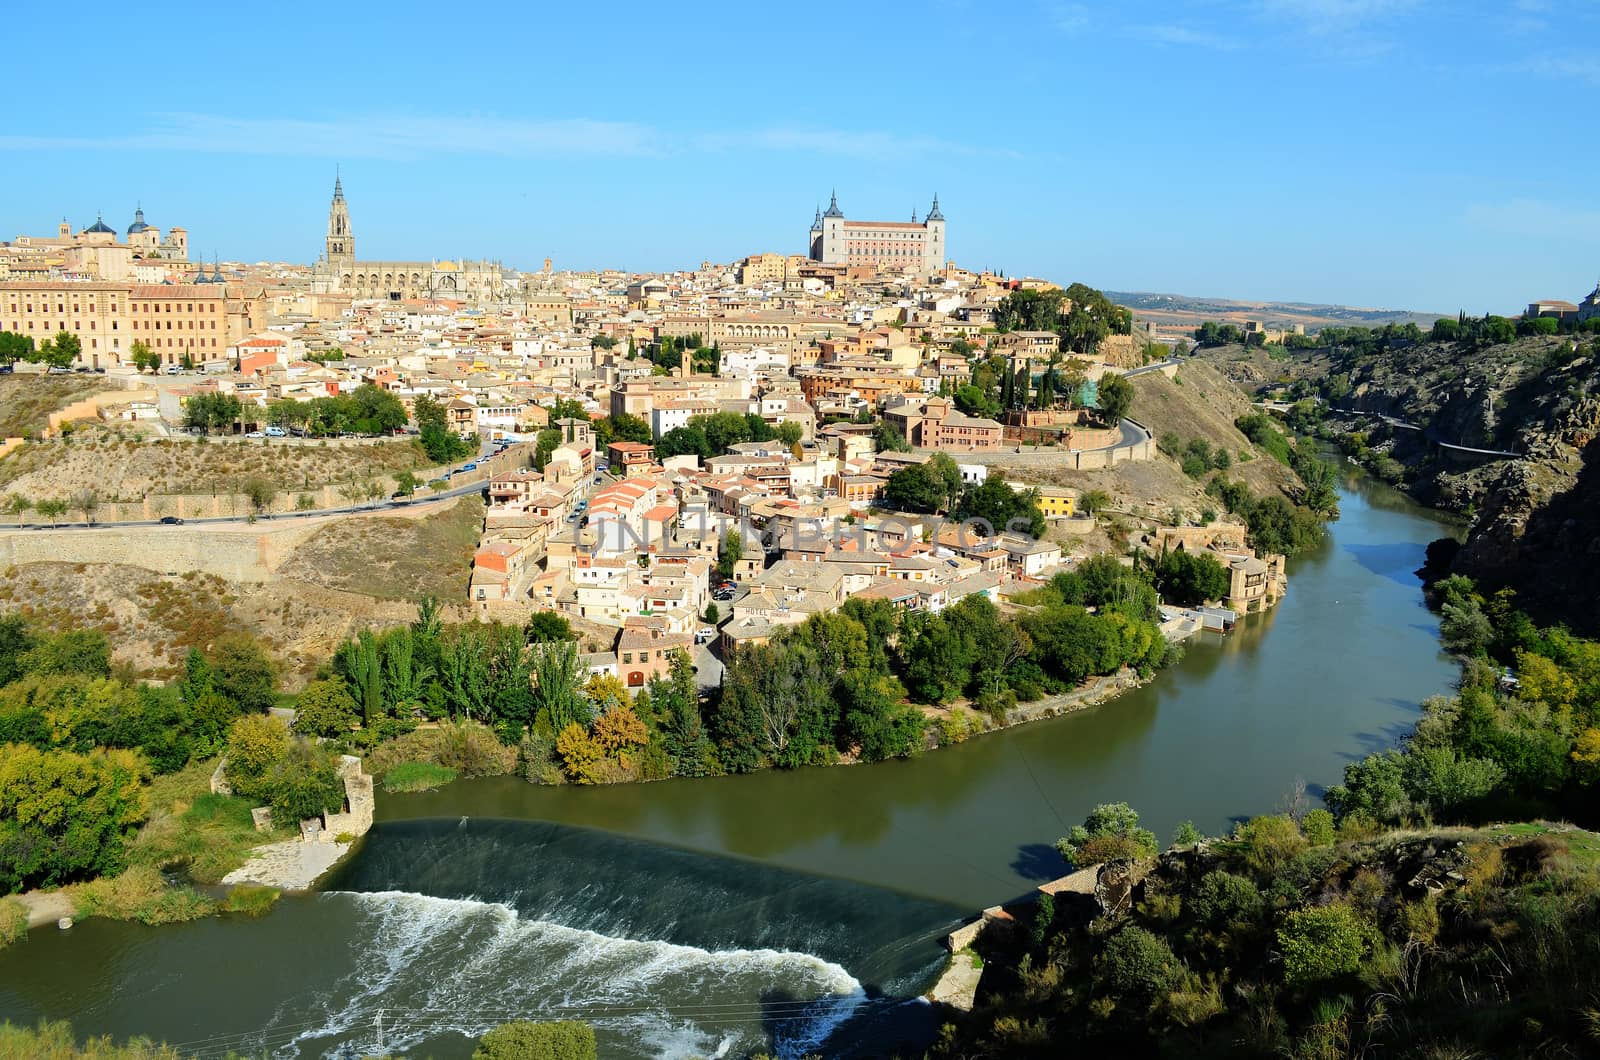 Toledo is a municipality located in central Spain, which was declared a World Heritage Site by UNESCO in 1986